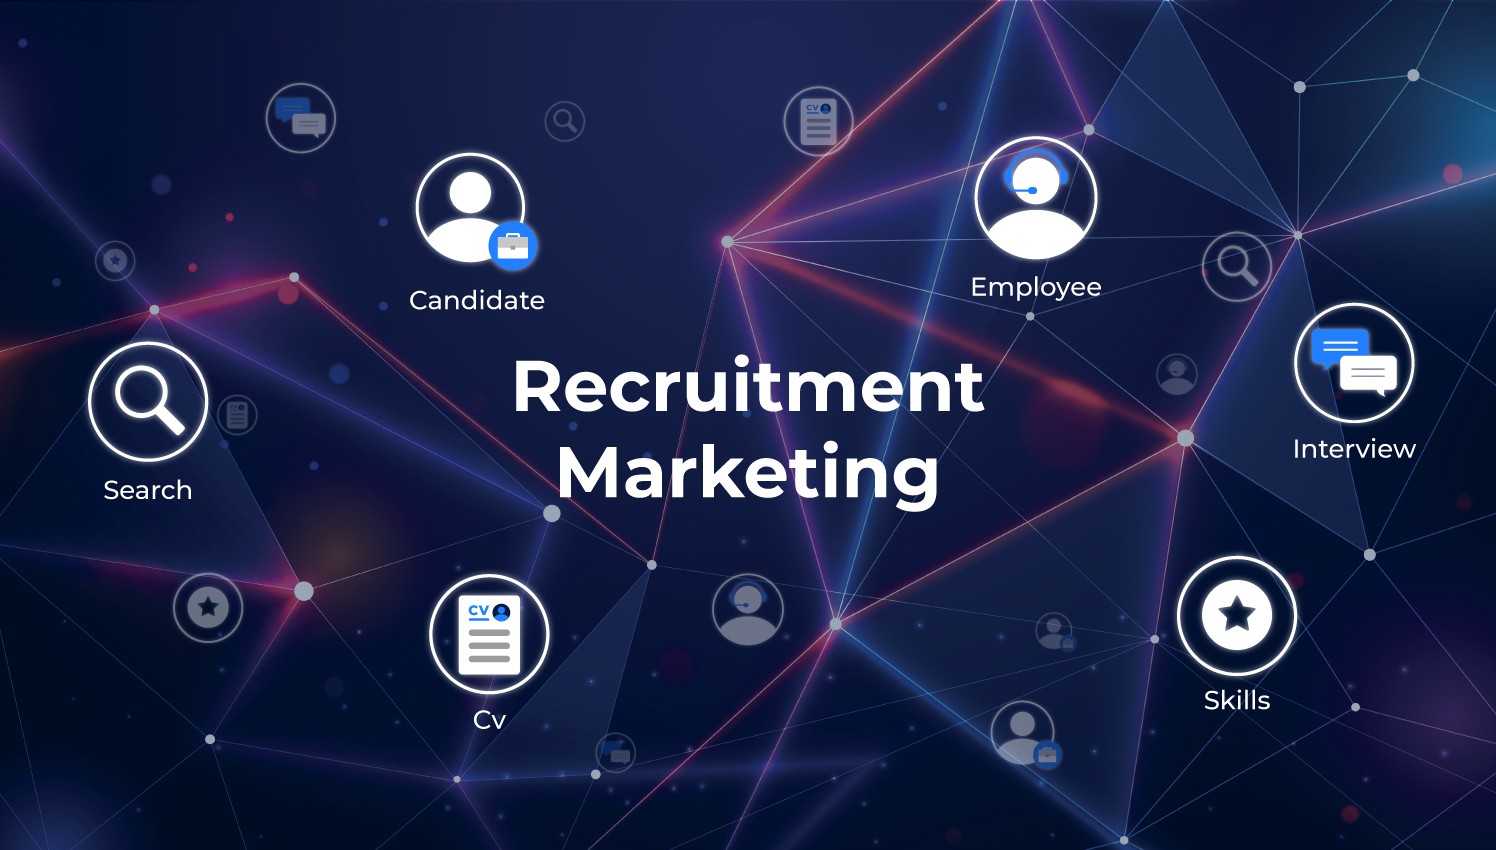 A group of icons depicting key aspects in recruitment marketing such as candidates, search, resumes, skills and interviews.